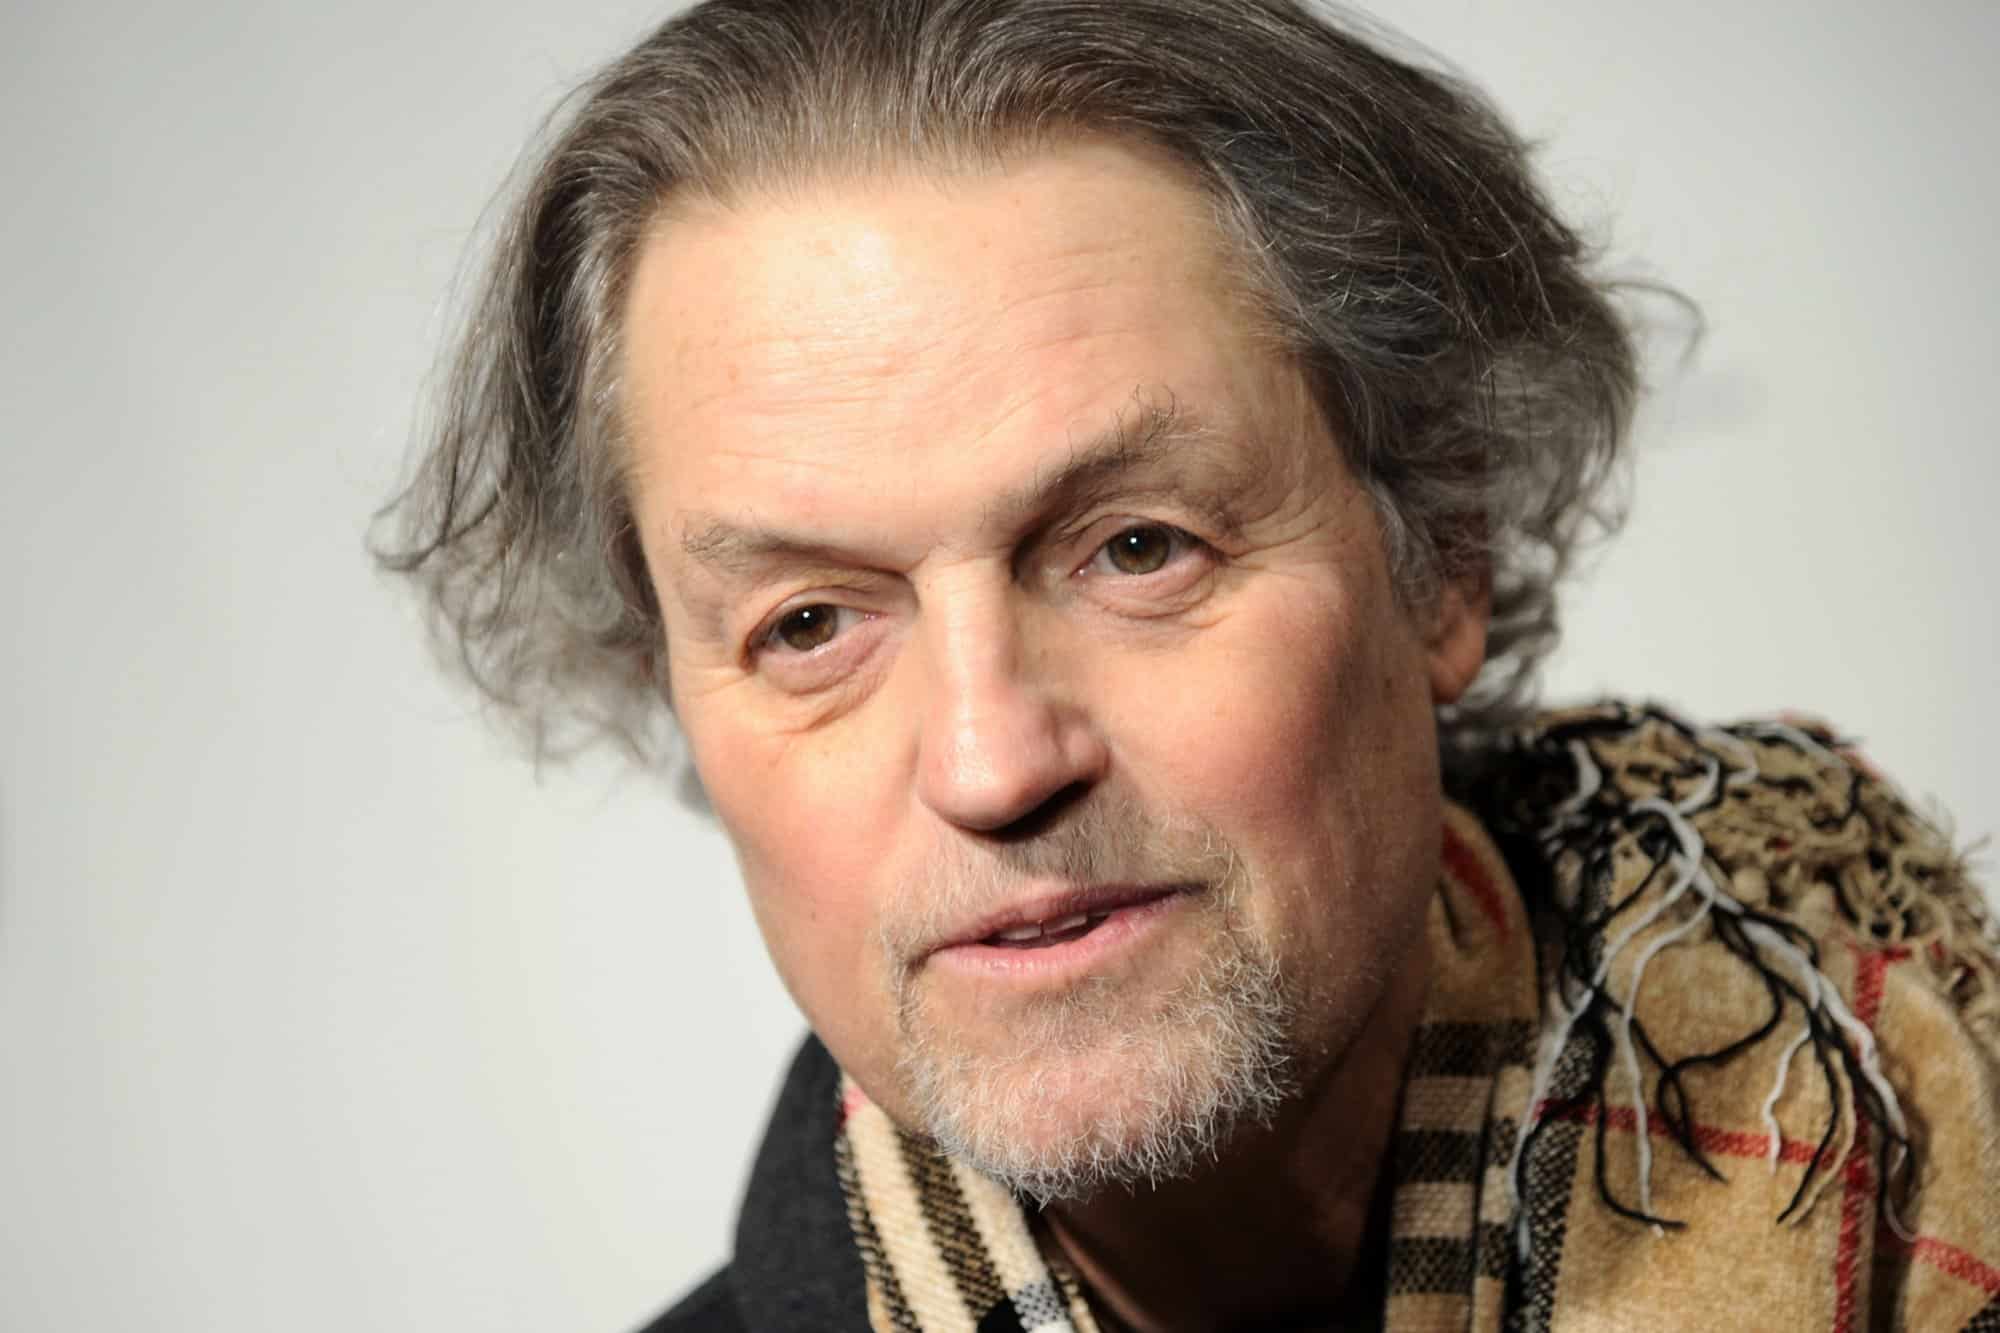 Jonathan Demme, director of The Silence of the Lambs, dies at 73